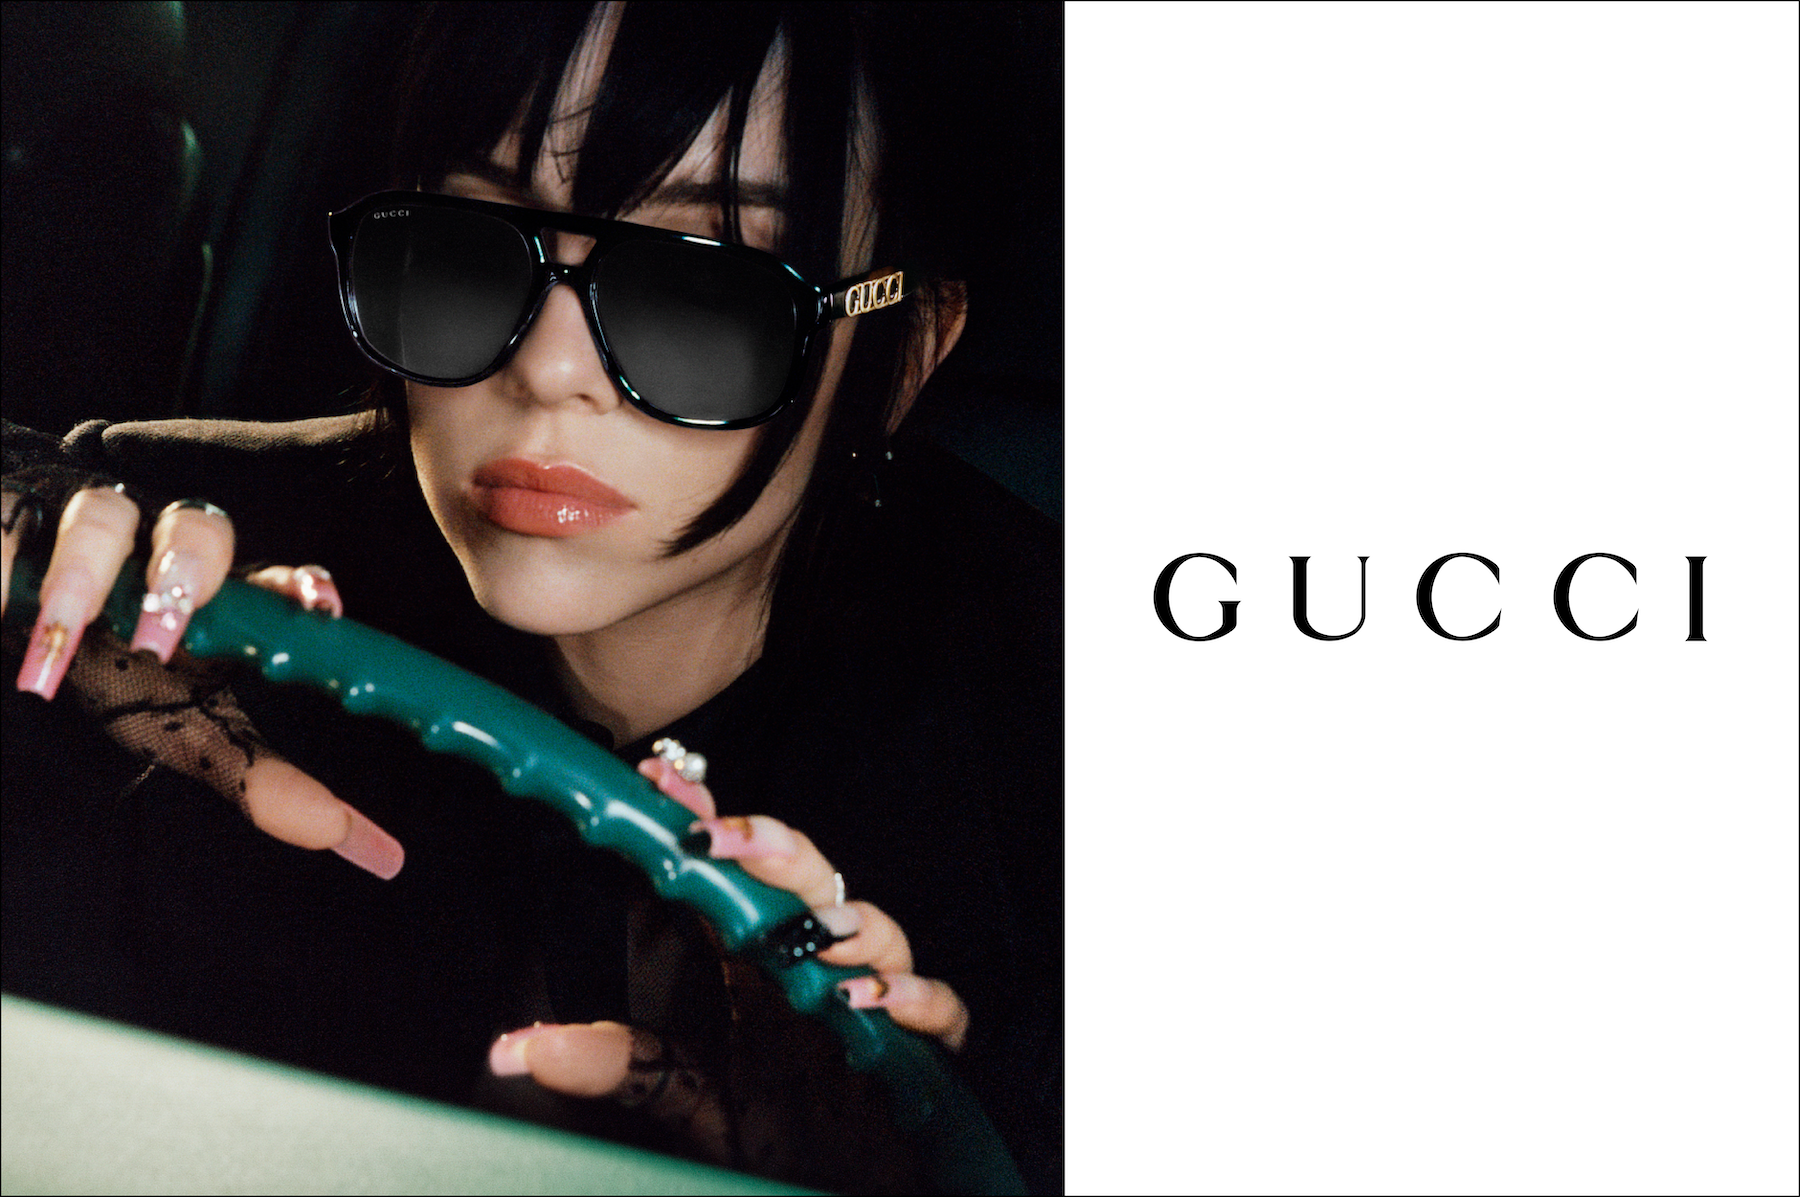 THE GUCCI AUTHENTICATION GUIDE